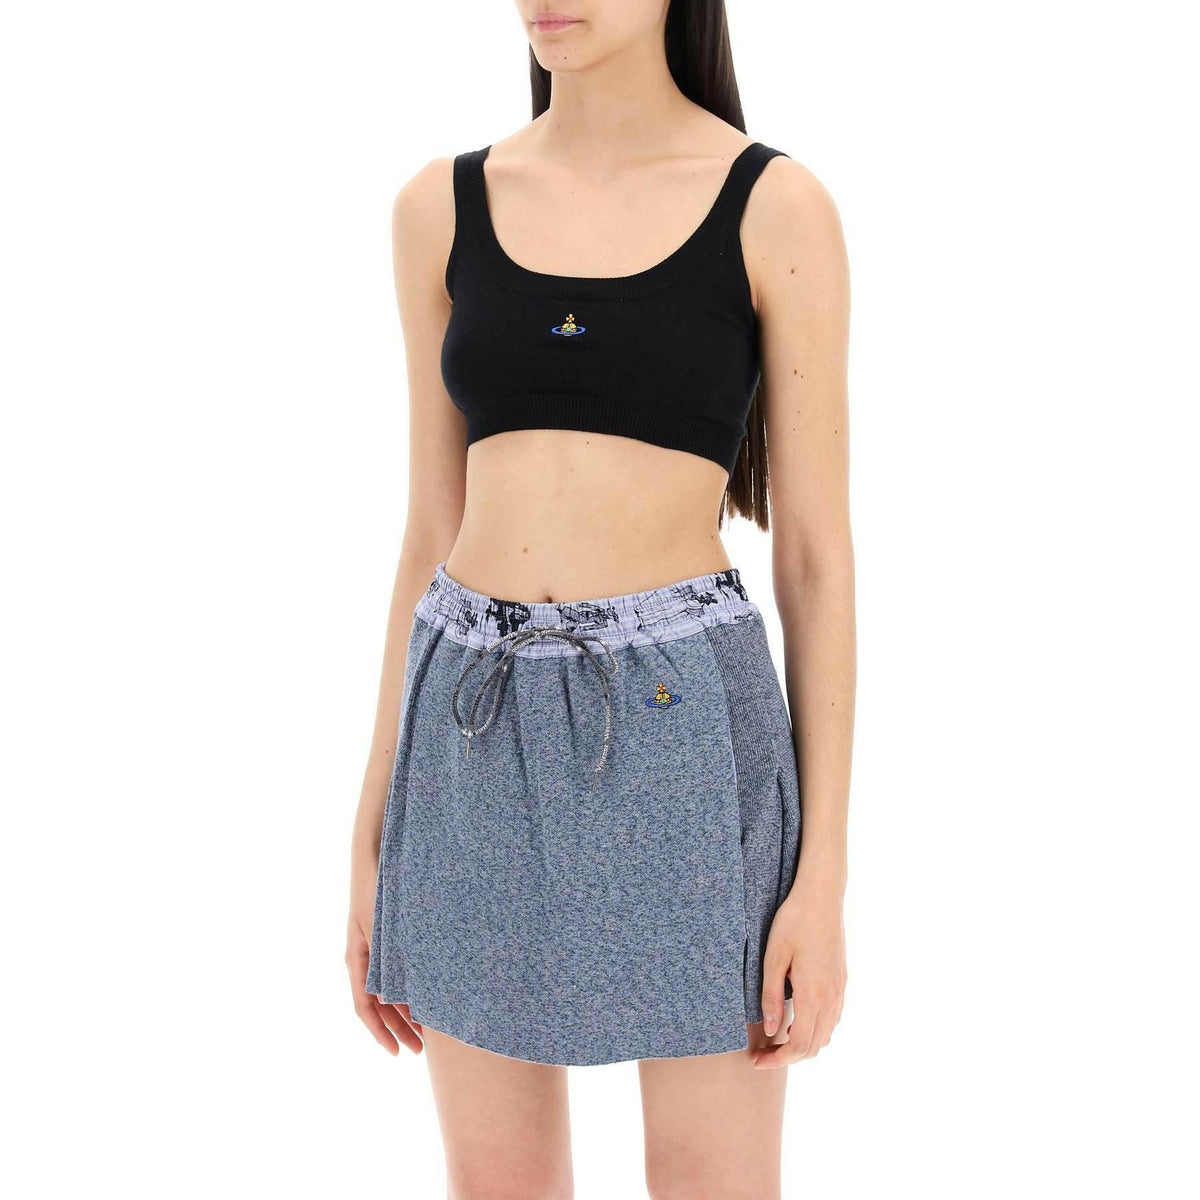 Black Pure Cotton Knit Cropped Bra Top With Orb Embroidery VIVIENNE WESTWOOD JOHN JULIA.